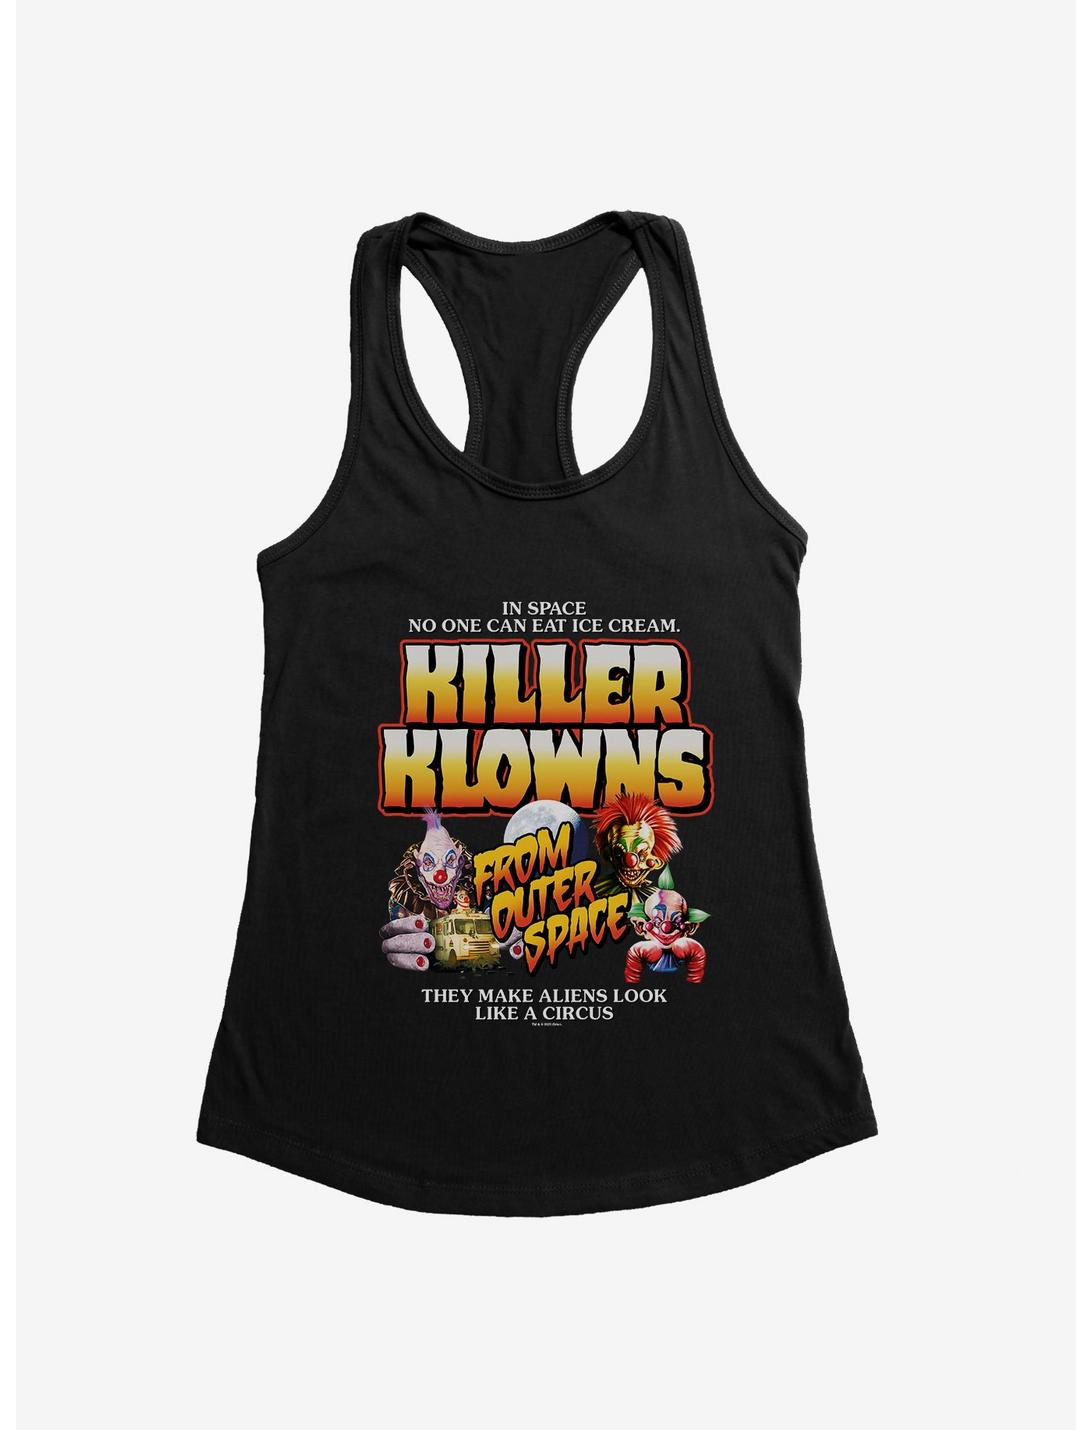 Killer Klowns From Outer Space In Space No One Can Eat Ice Cream Girls Tank, BLACK, hi-res